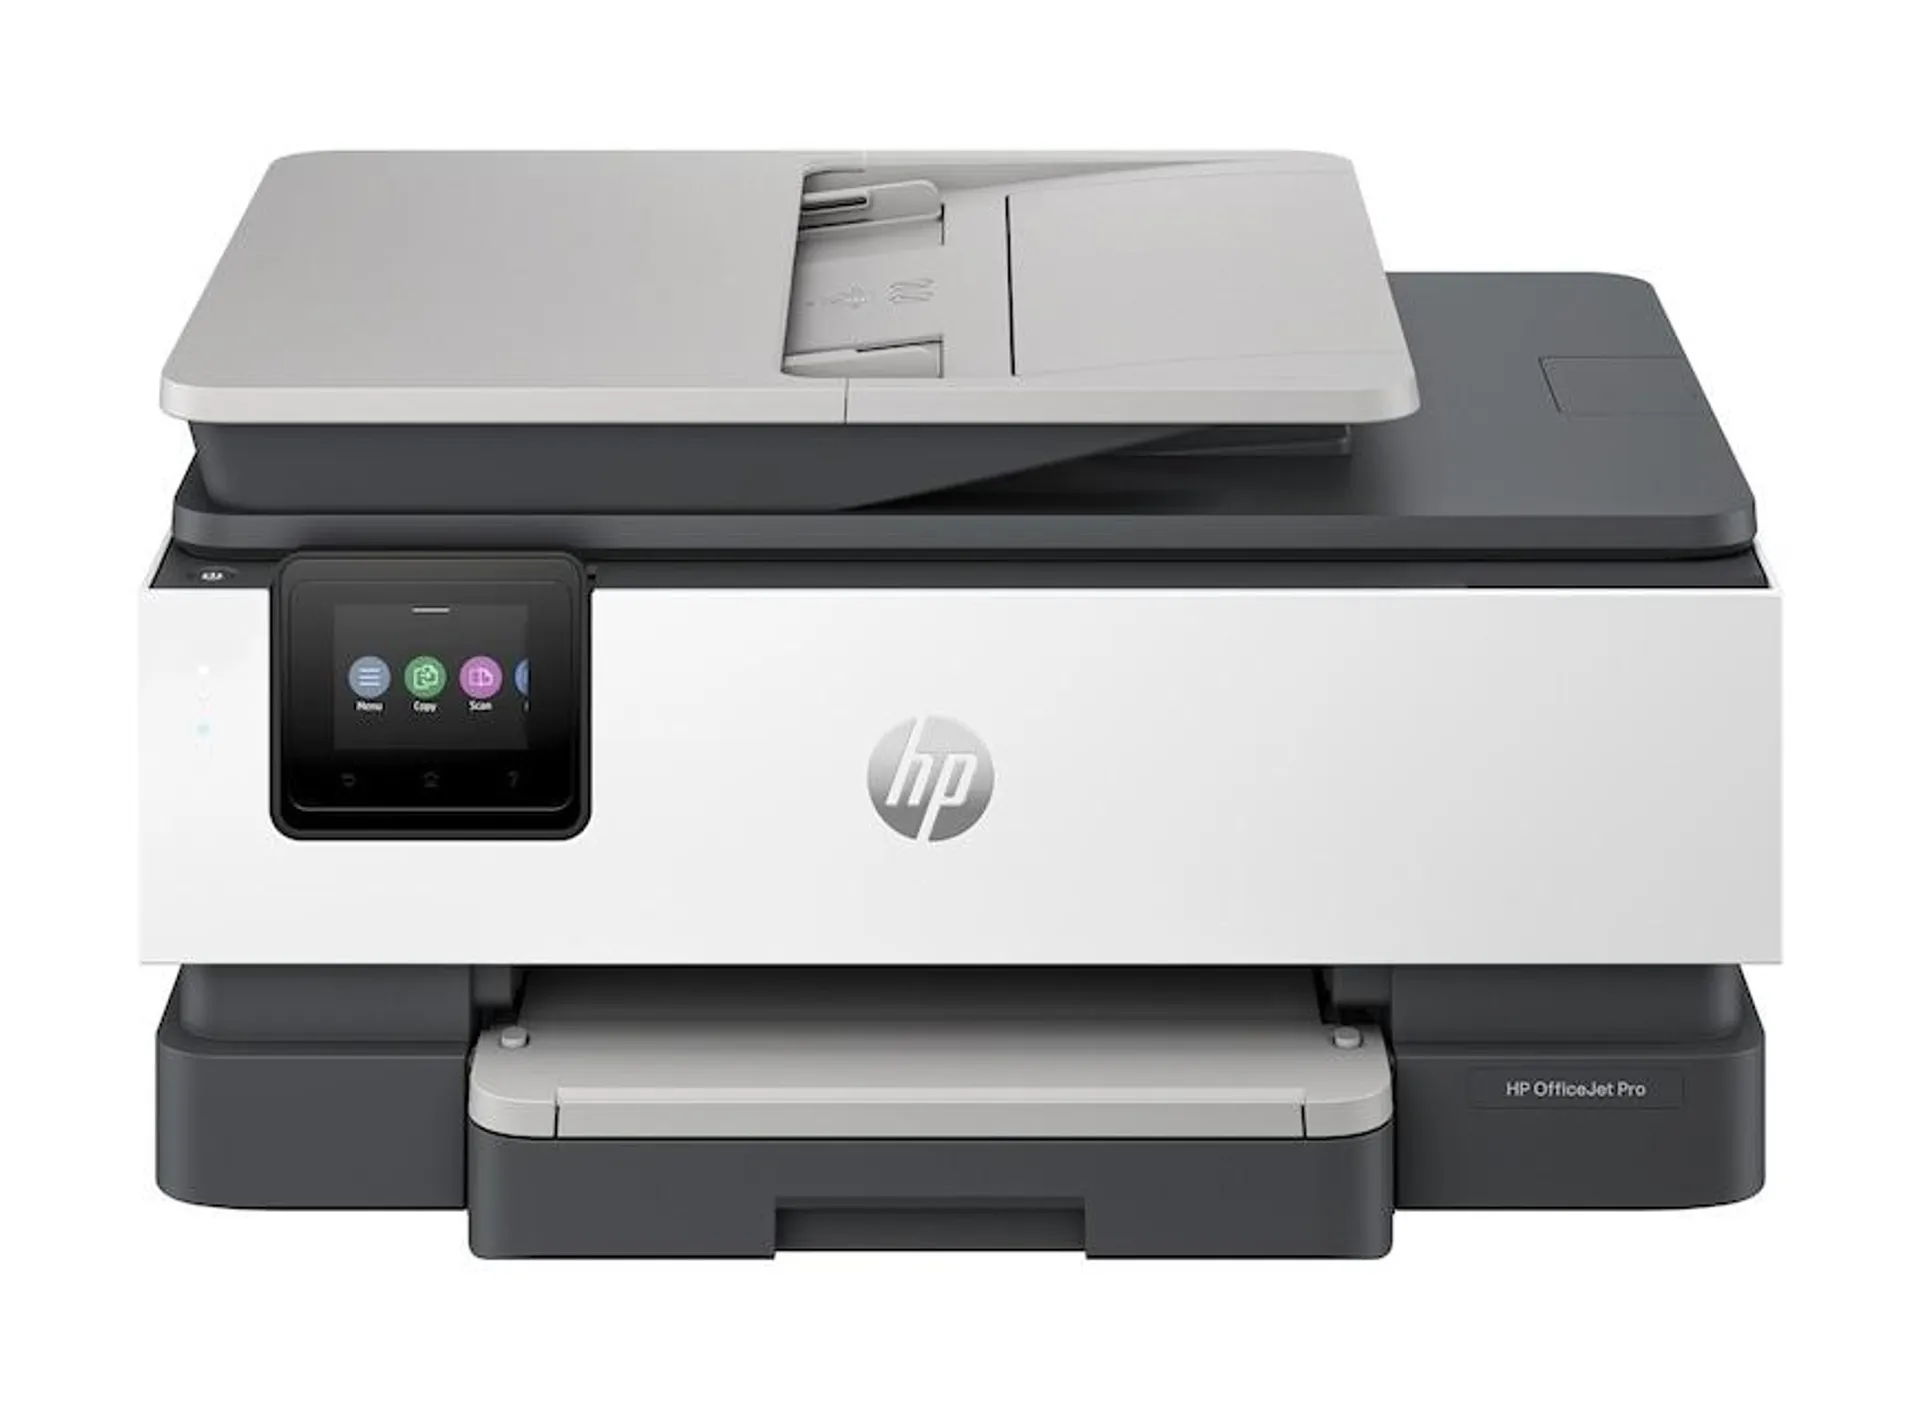 HP OfficeJet Pro 8122e Wireless All-in-One Printer with 3 months Instant Ink